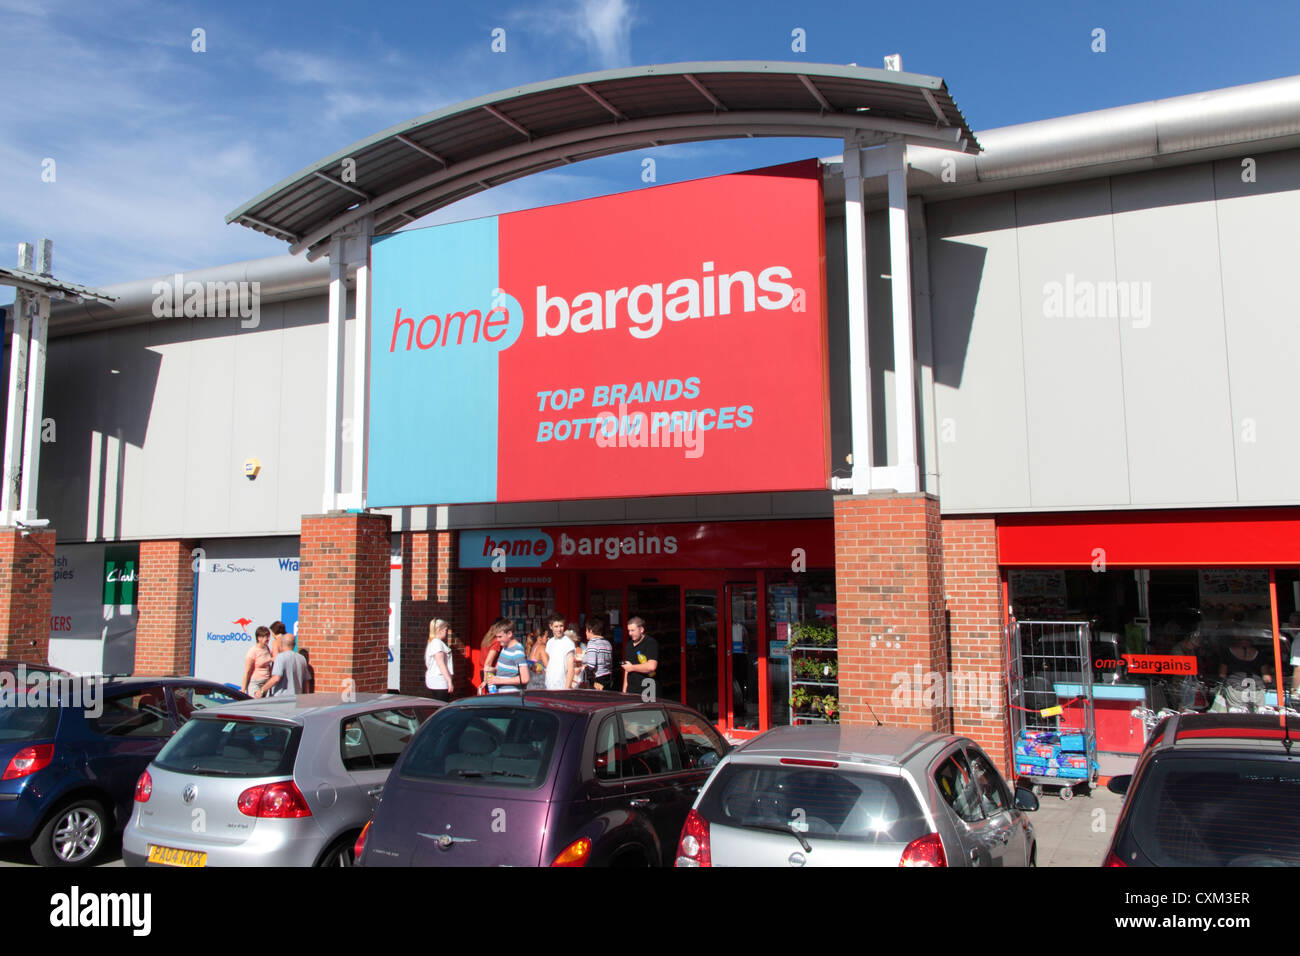 Home Bargains High Resolution Stock Photography and Images - Alamy